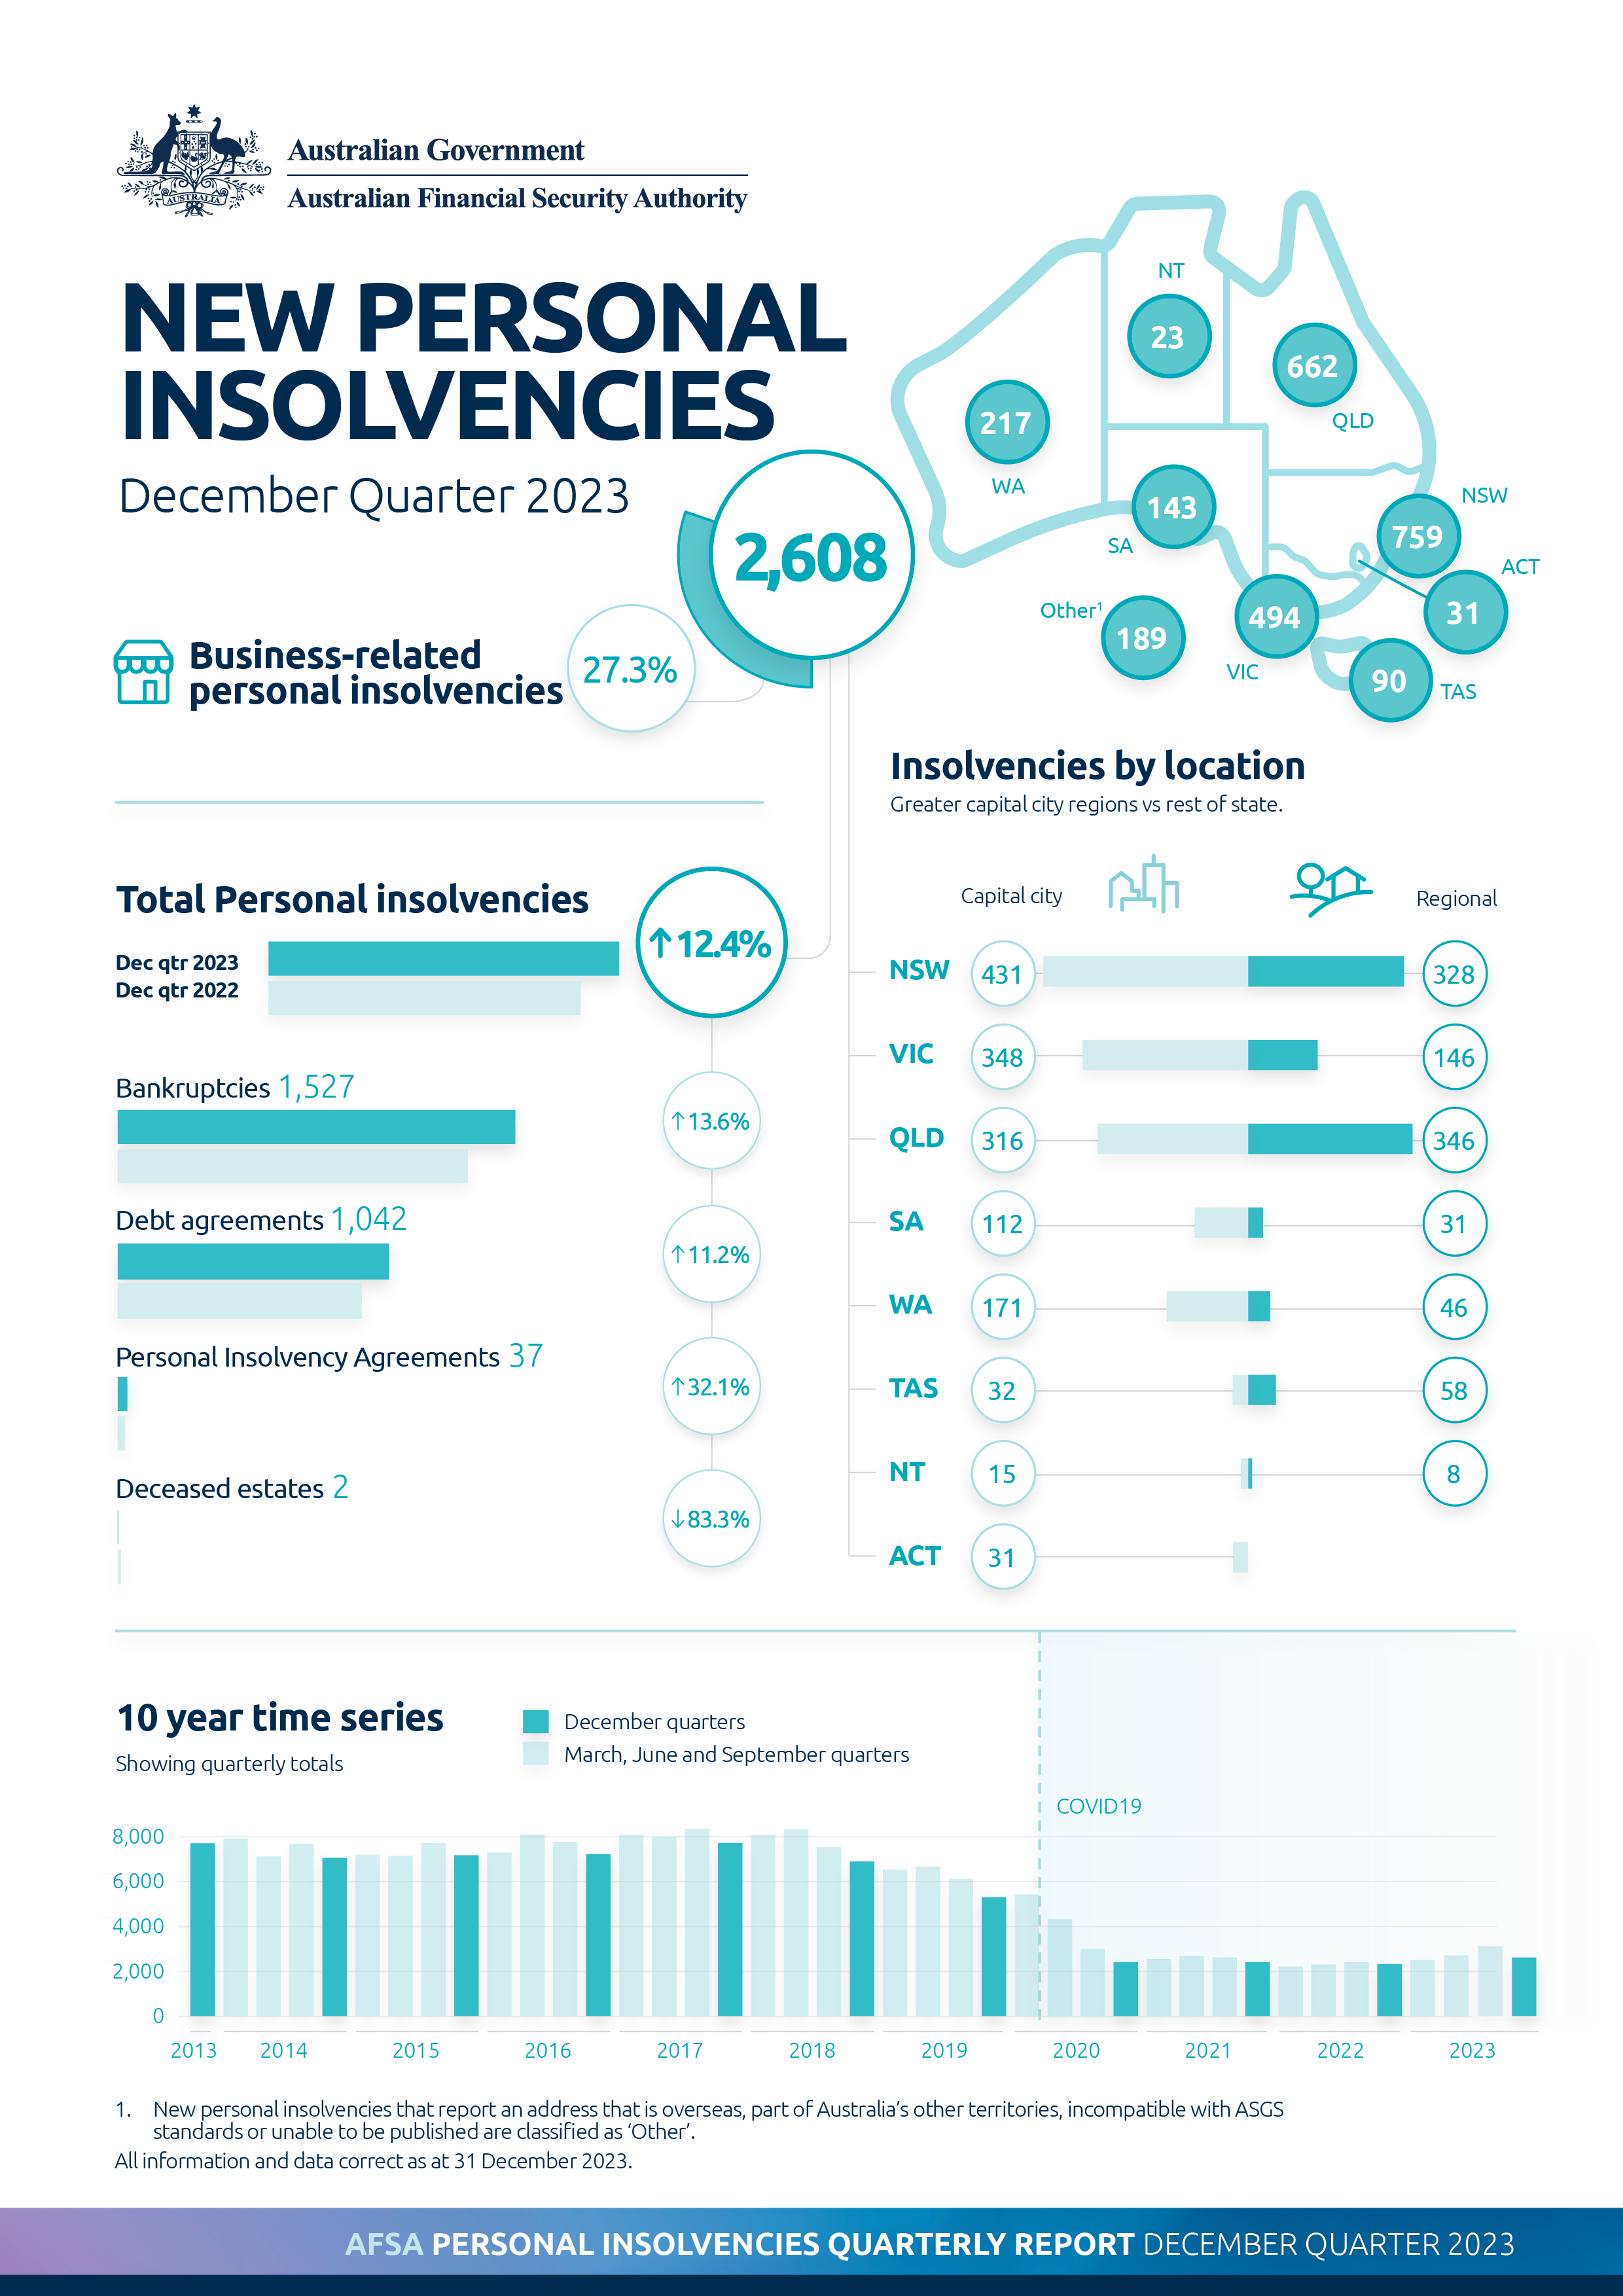 Bar graphs presenting the new personal insolvencies recorded for the December quarter of 2023. To quickly grasp the figures, consult the summarized information provided below. For a more comprehensive breakdown, refer to the workbooks available on the Quarterly Personal Insolvency Statistics page.